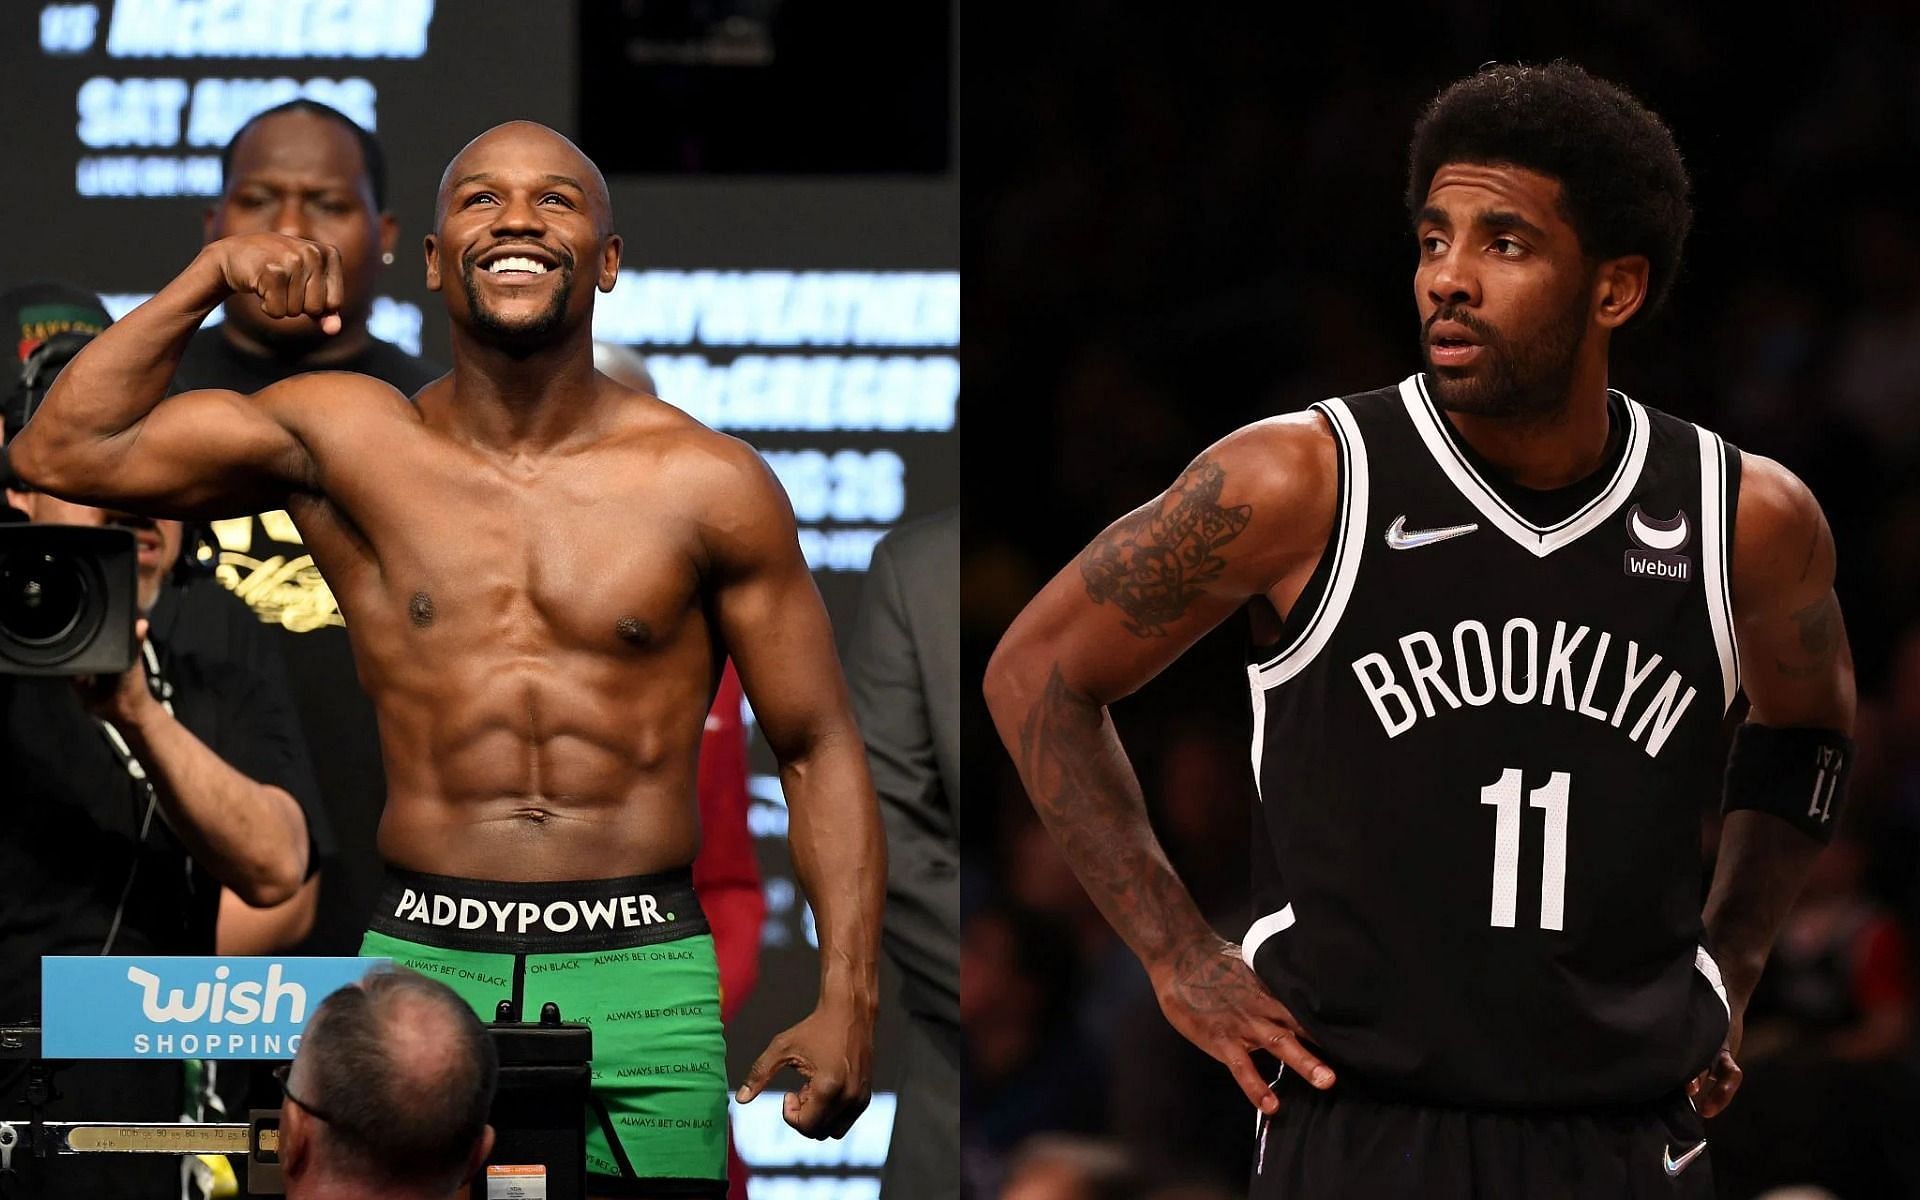 Floyd Mayweather (L) has shared a photo with Brooklyn Nets star Kyrie Irving (R)